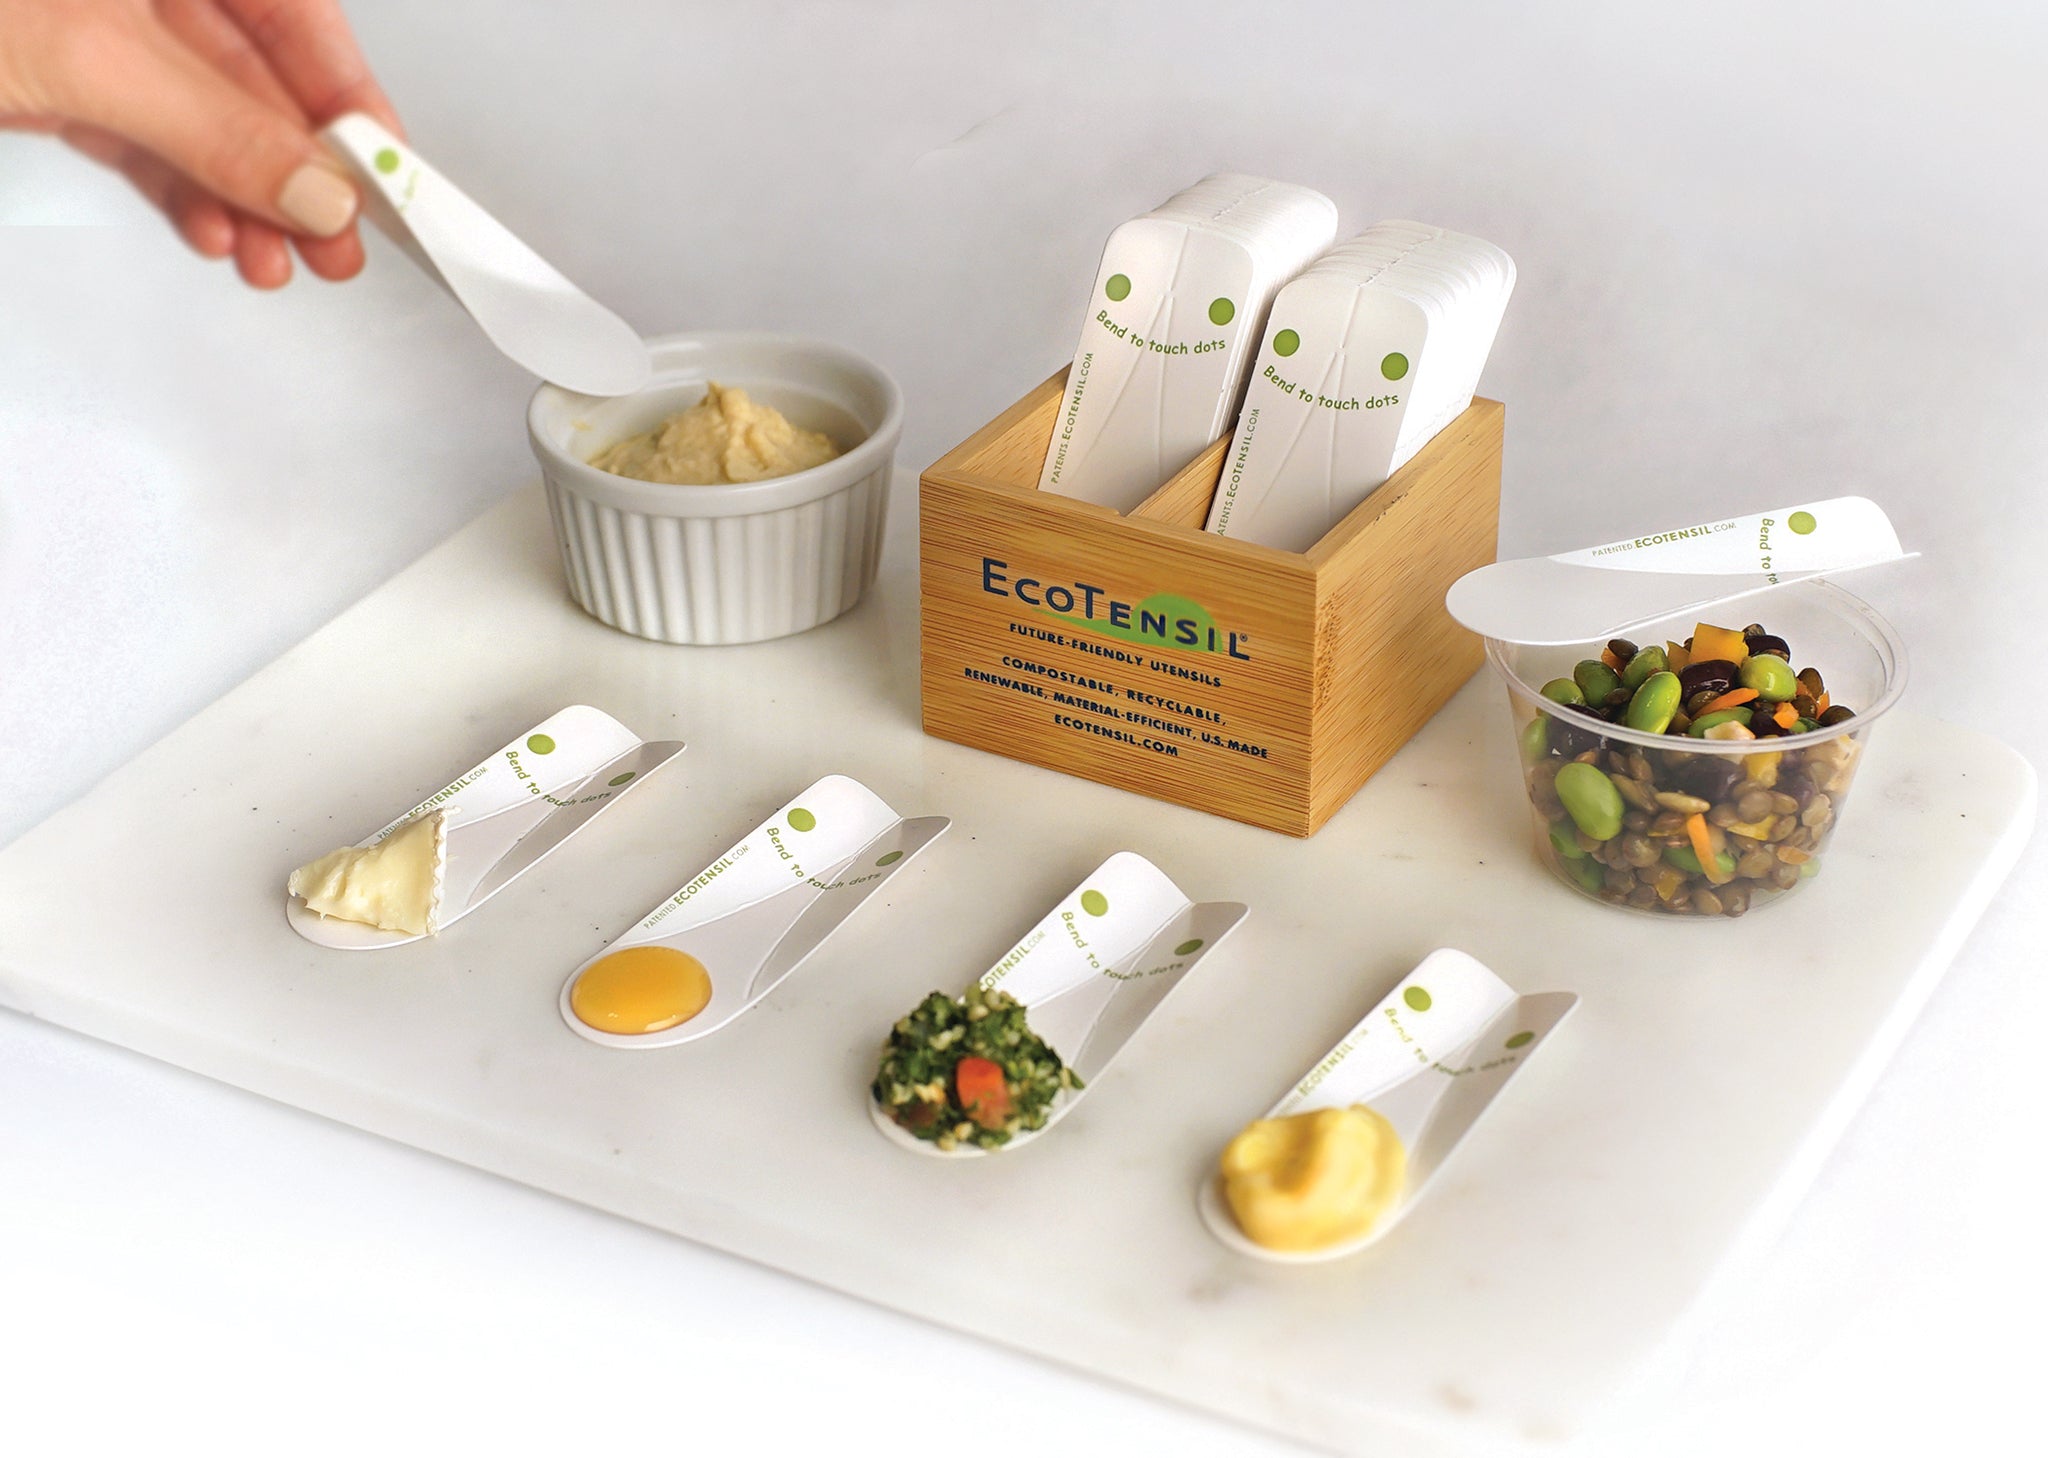 EcoTaster sampling spoons, by EcoTensil are a great way to achieve your zero waste goals for food demos! 